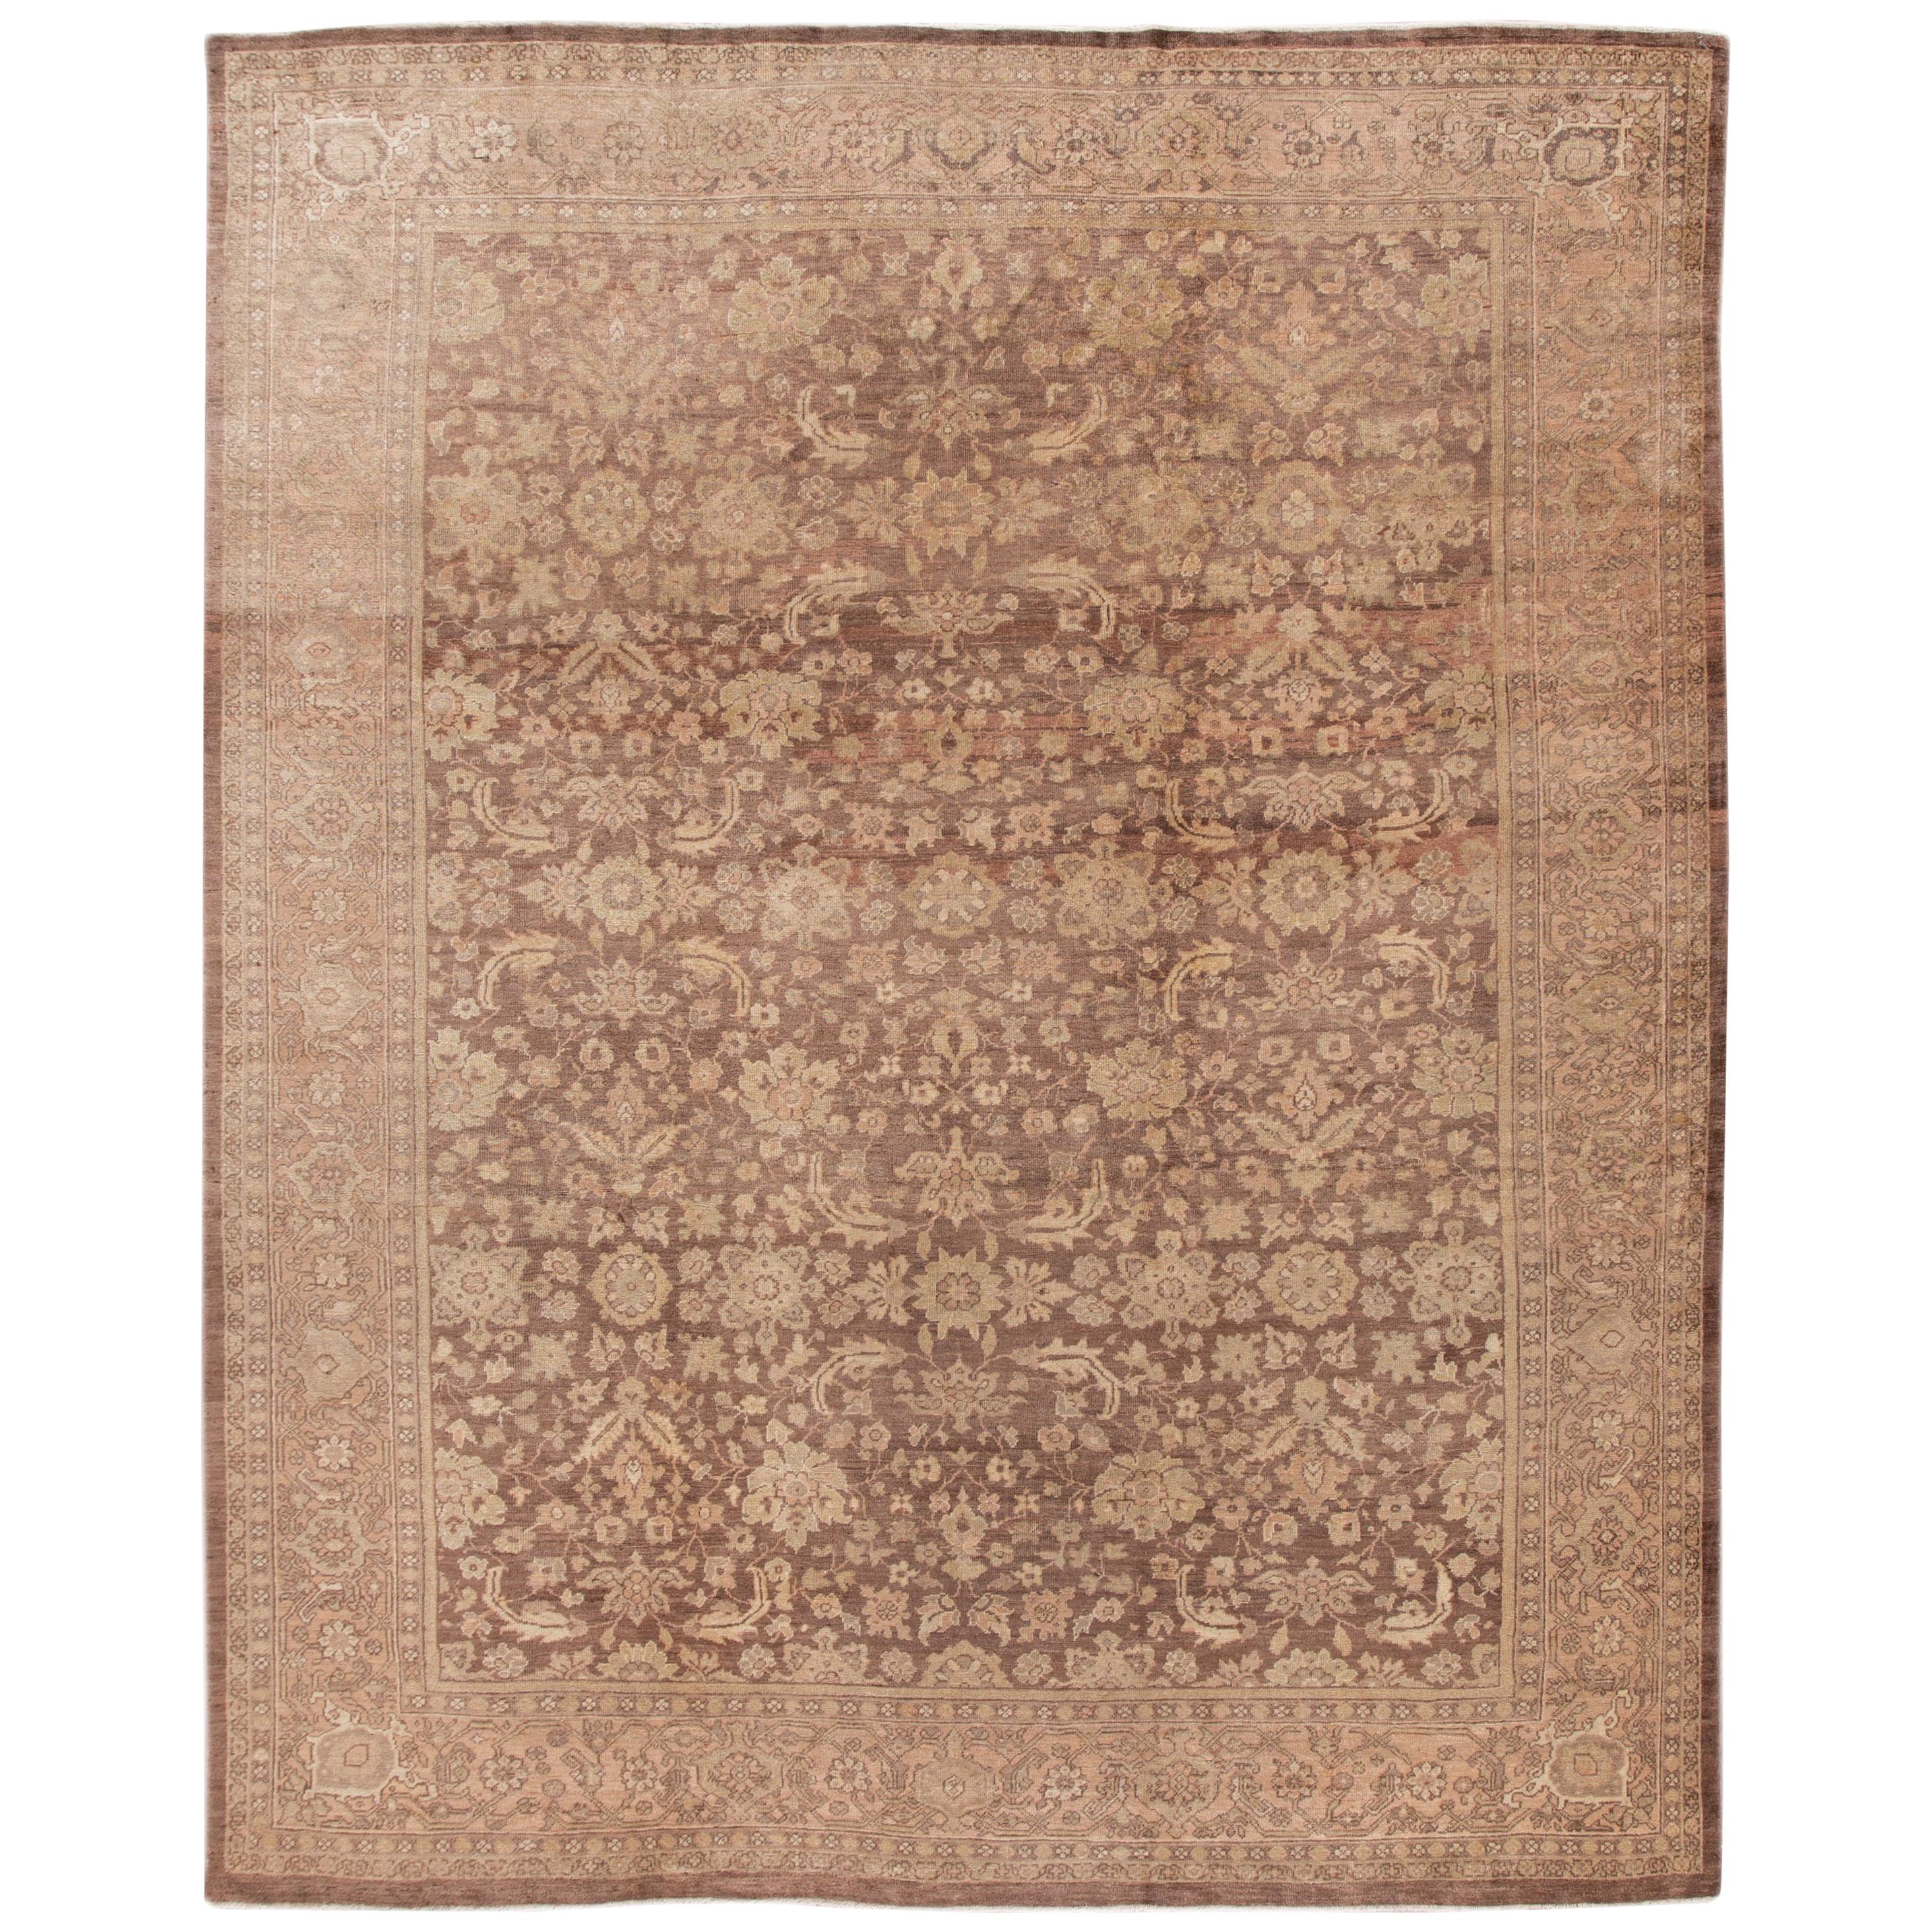 Antique Mahal Handmade Room Size Wool Rug For Sale